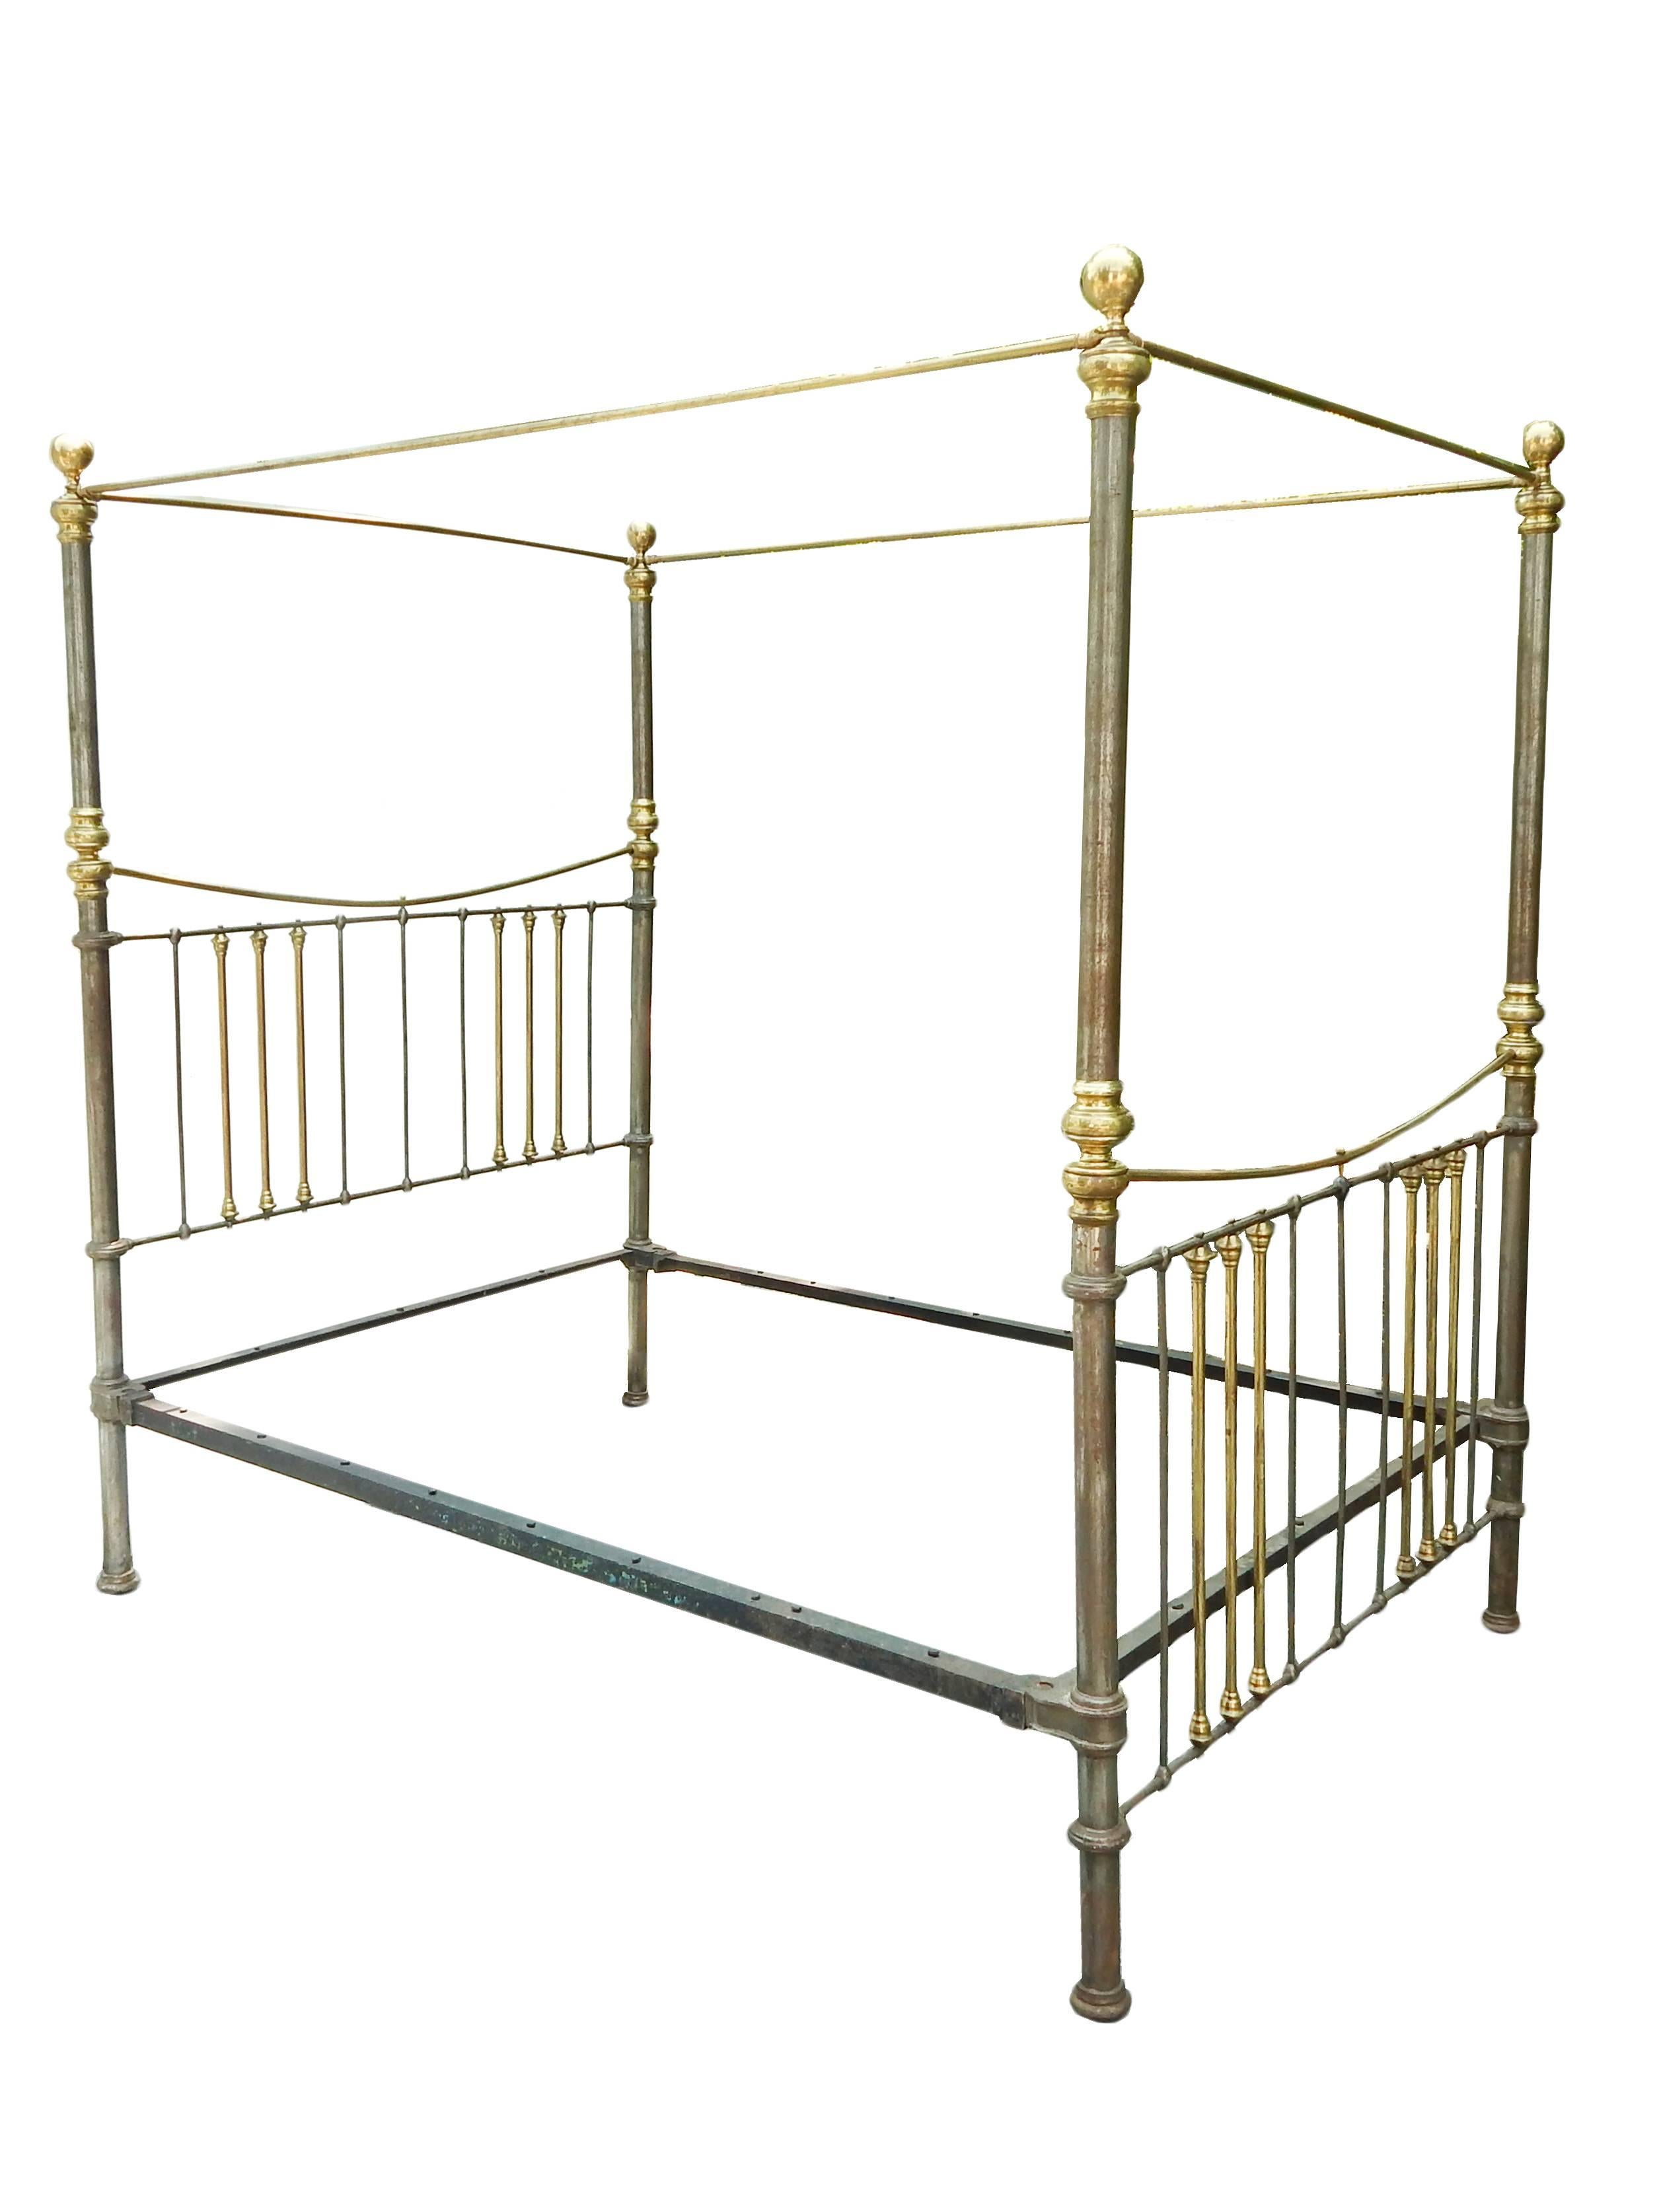 20th Century Rare Iron and Brass Queen Canopy Bed For Sale